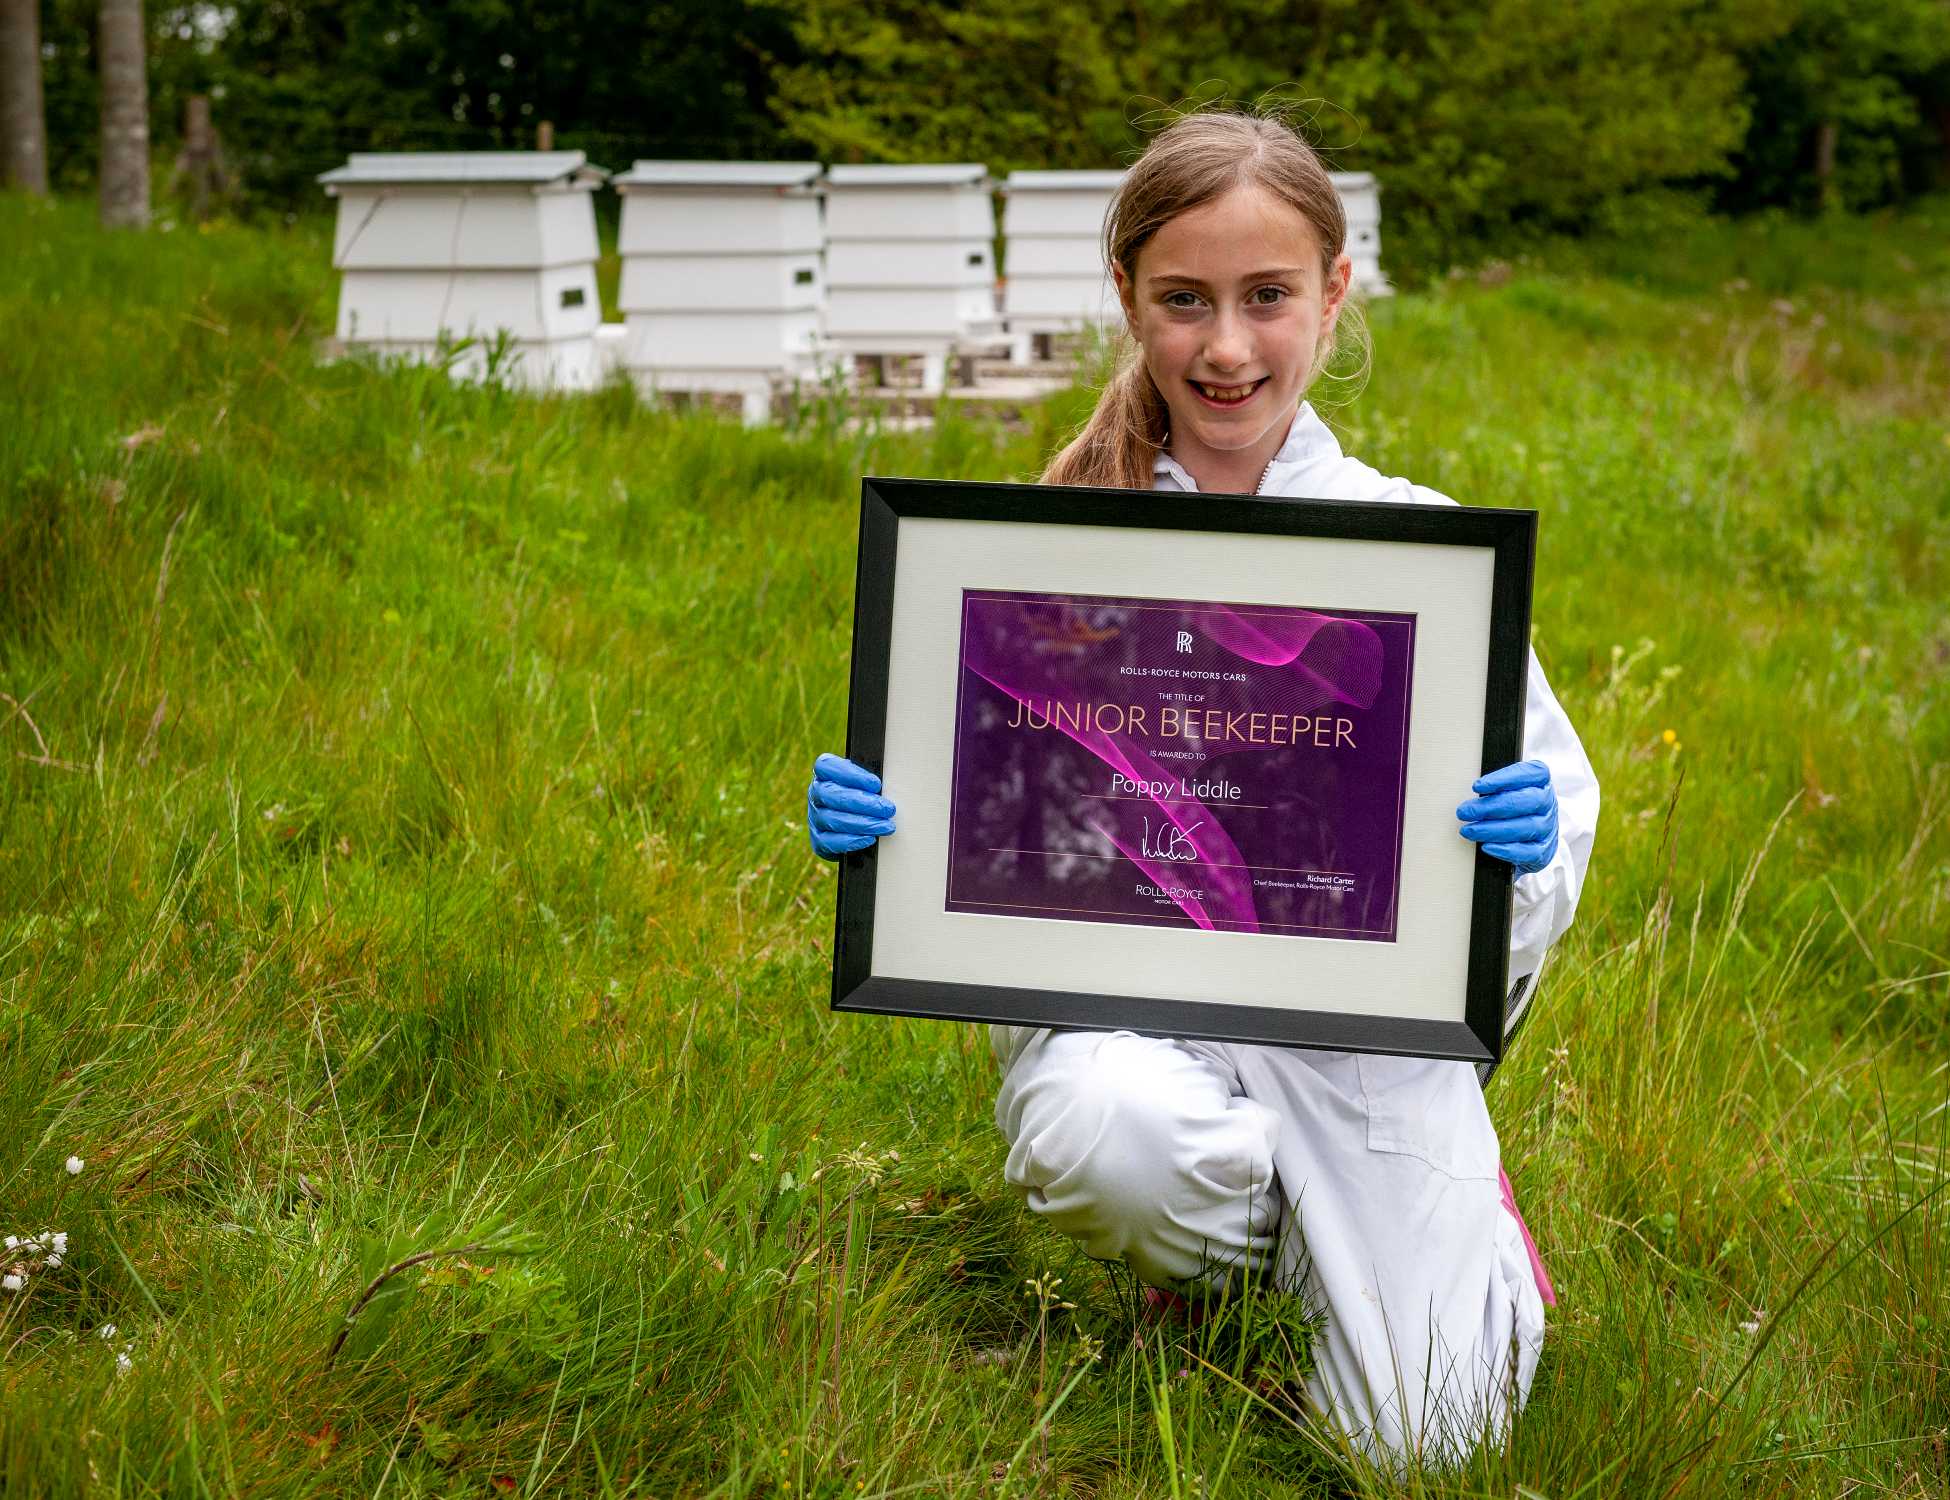 ROLLS-ROYCE APPOINTS POPPY LIDDLE AS FIRST-EVER JUNIOR BEEKEEPER